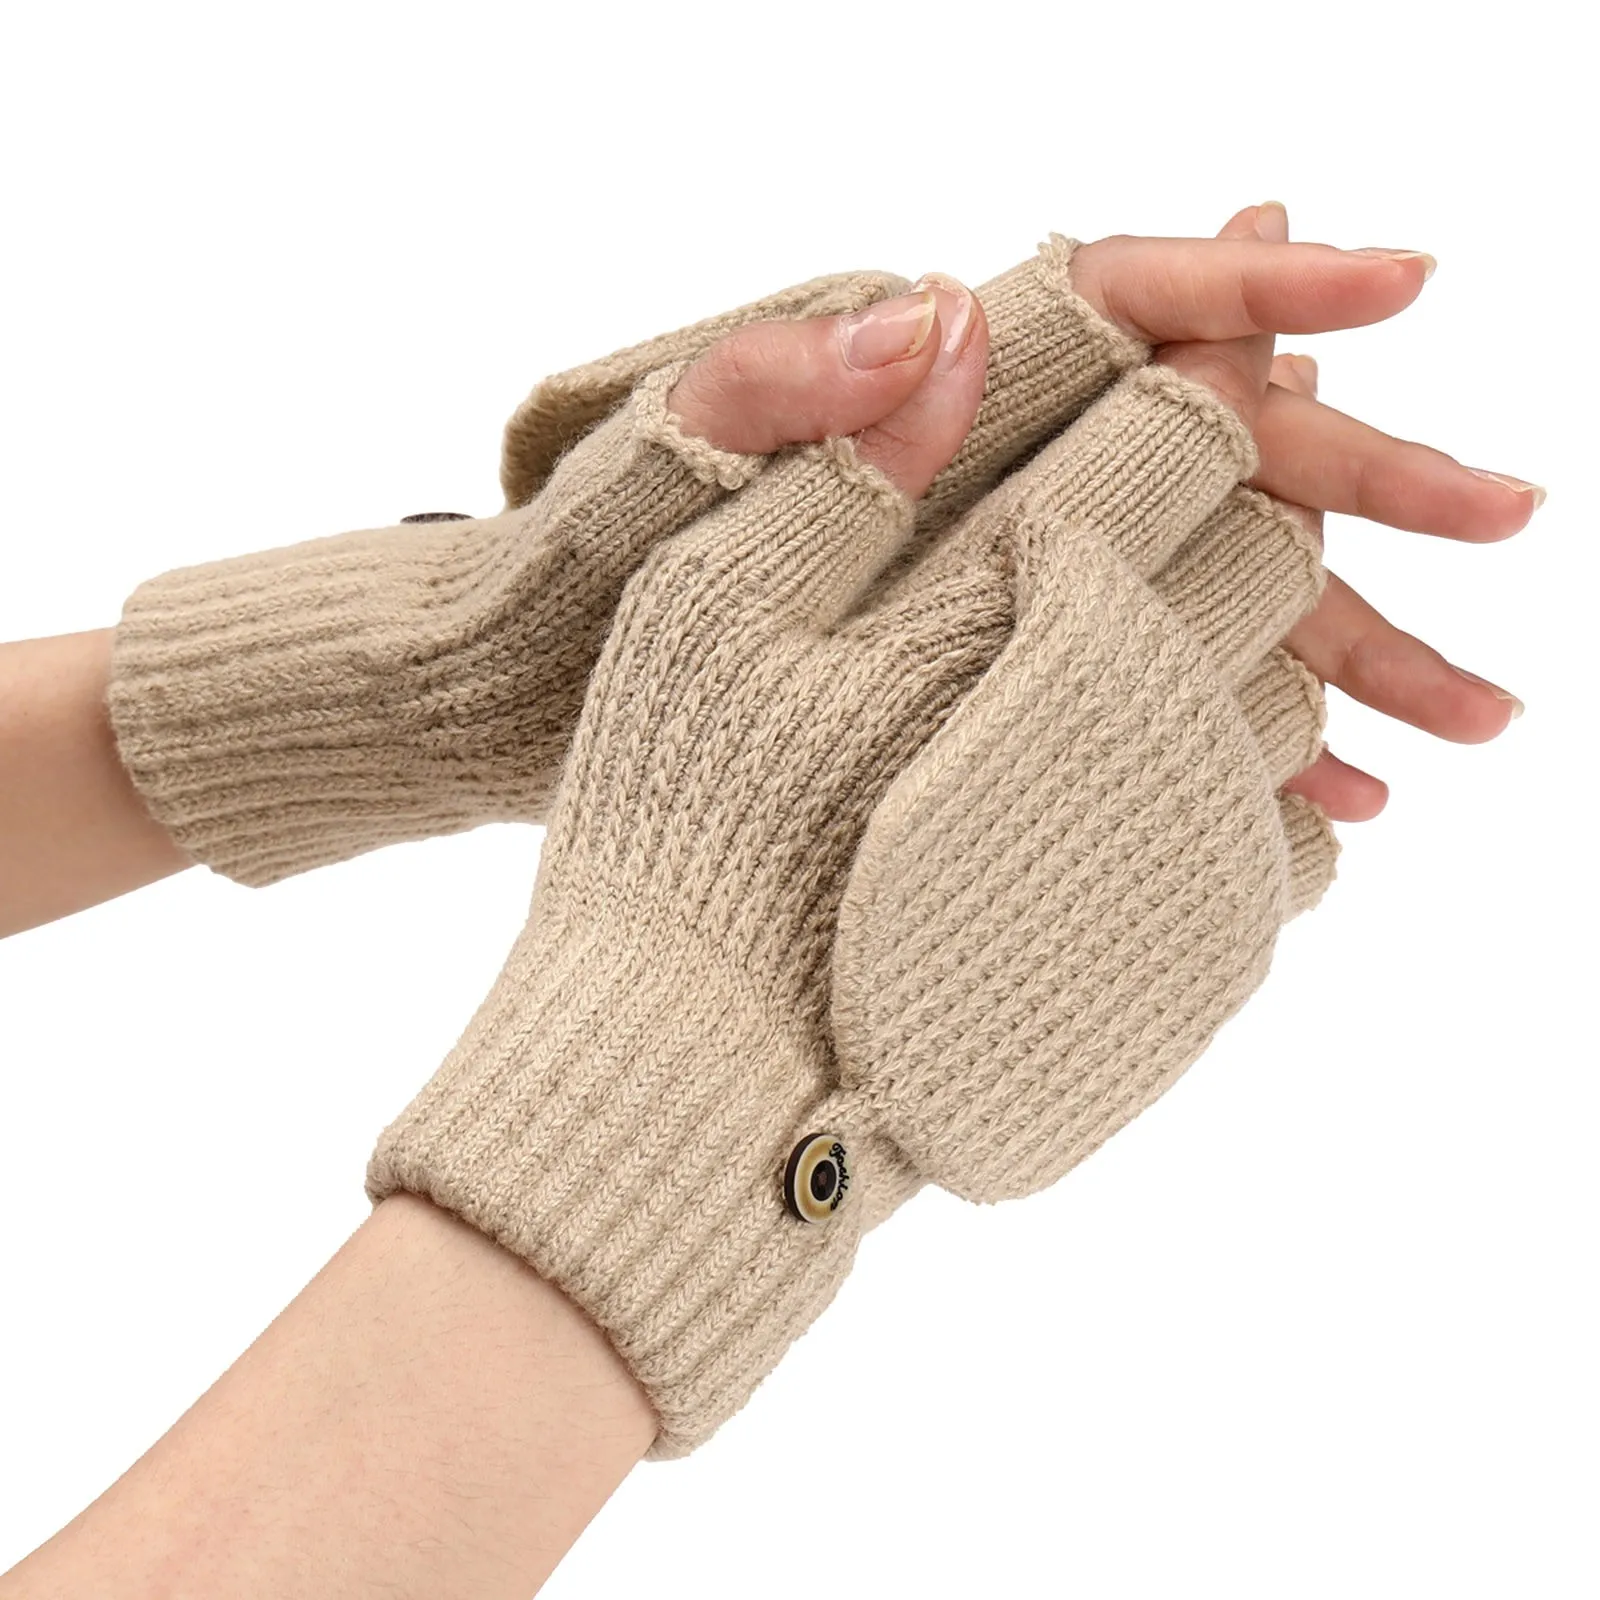 

2020 Winter Warm Thickening Wool Gloves Knitted Flip Fingerless Exposed Finger Thick Gloves Without Fingers Mittens Glove Women